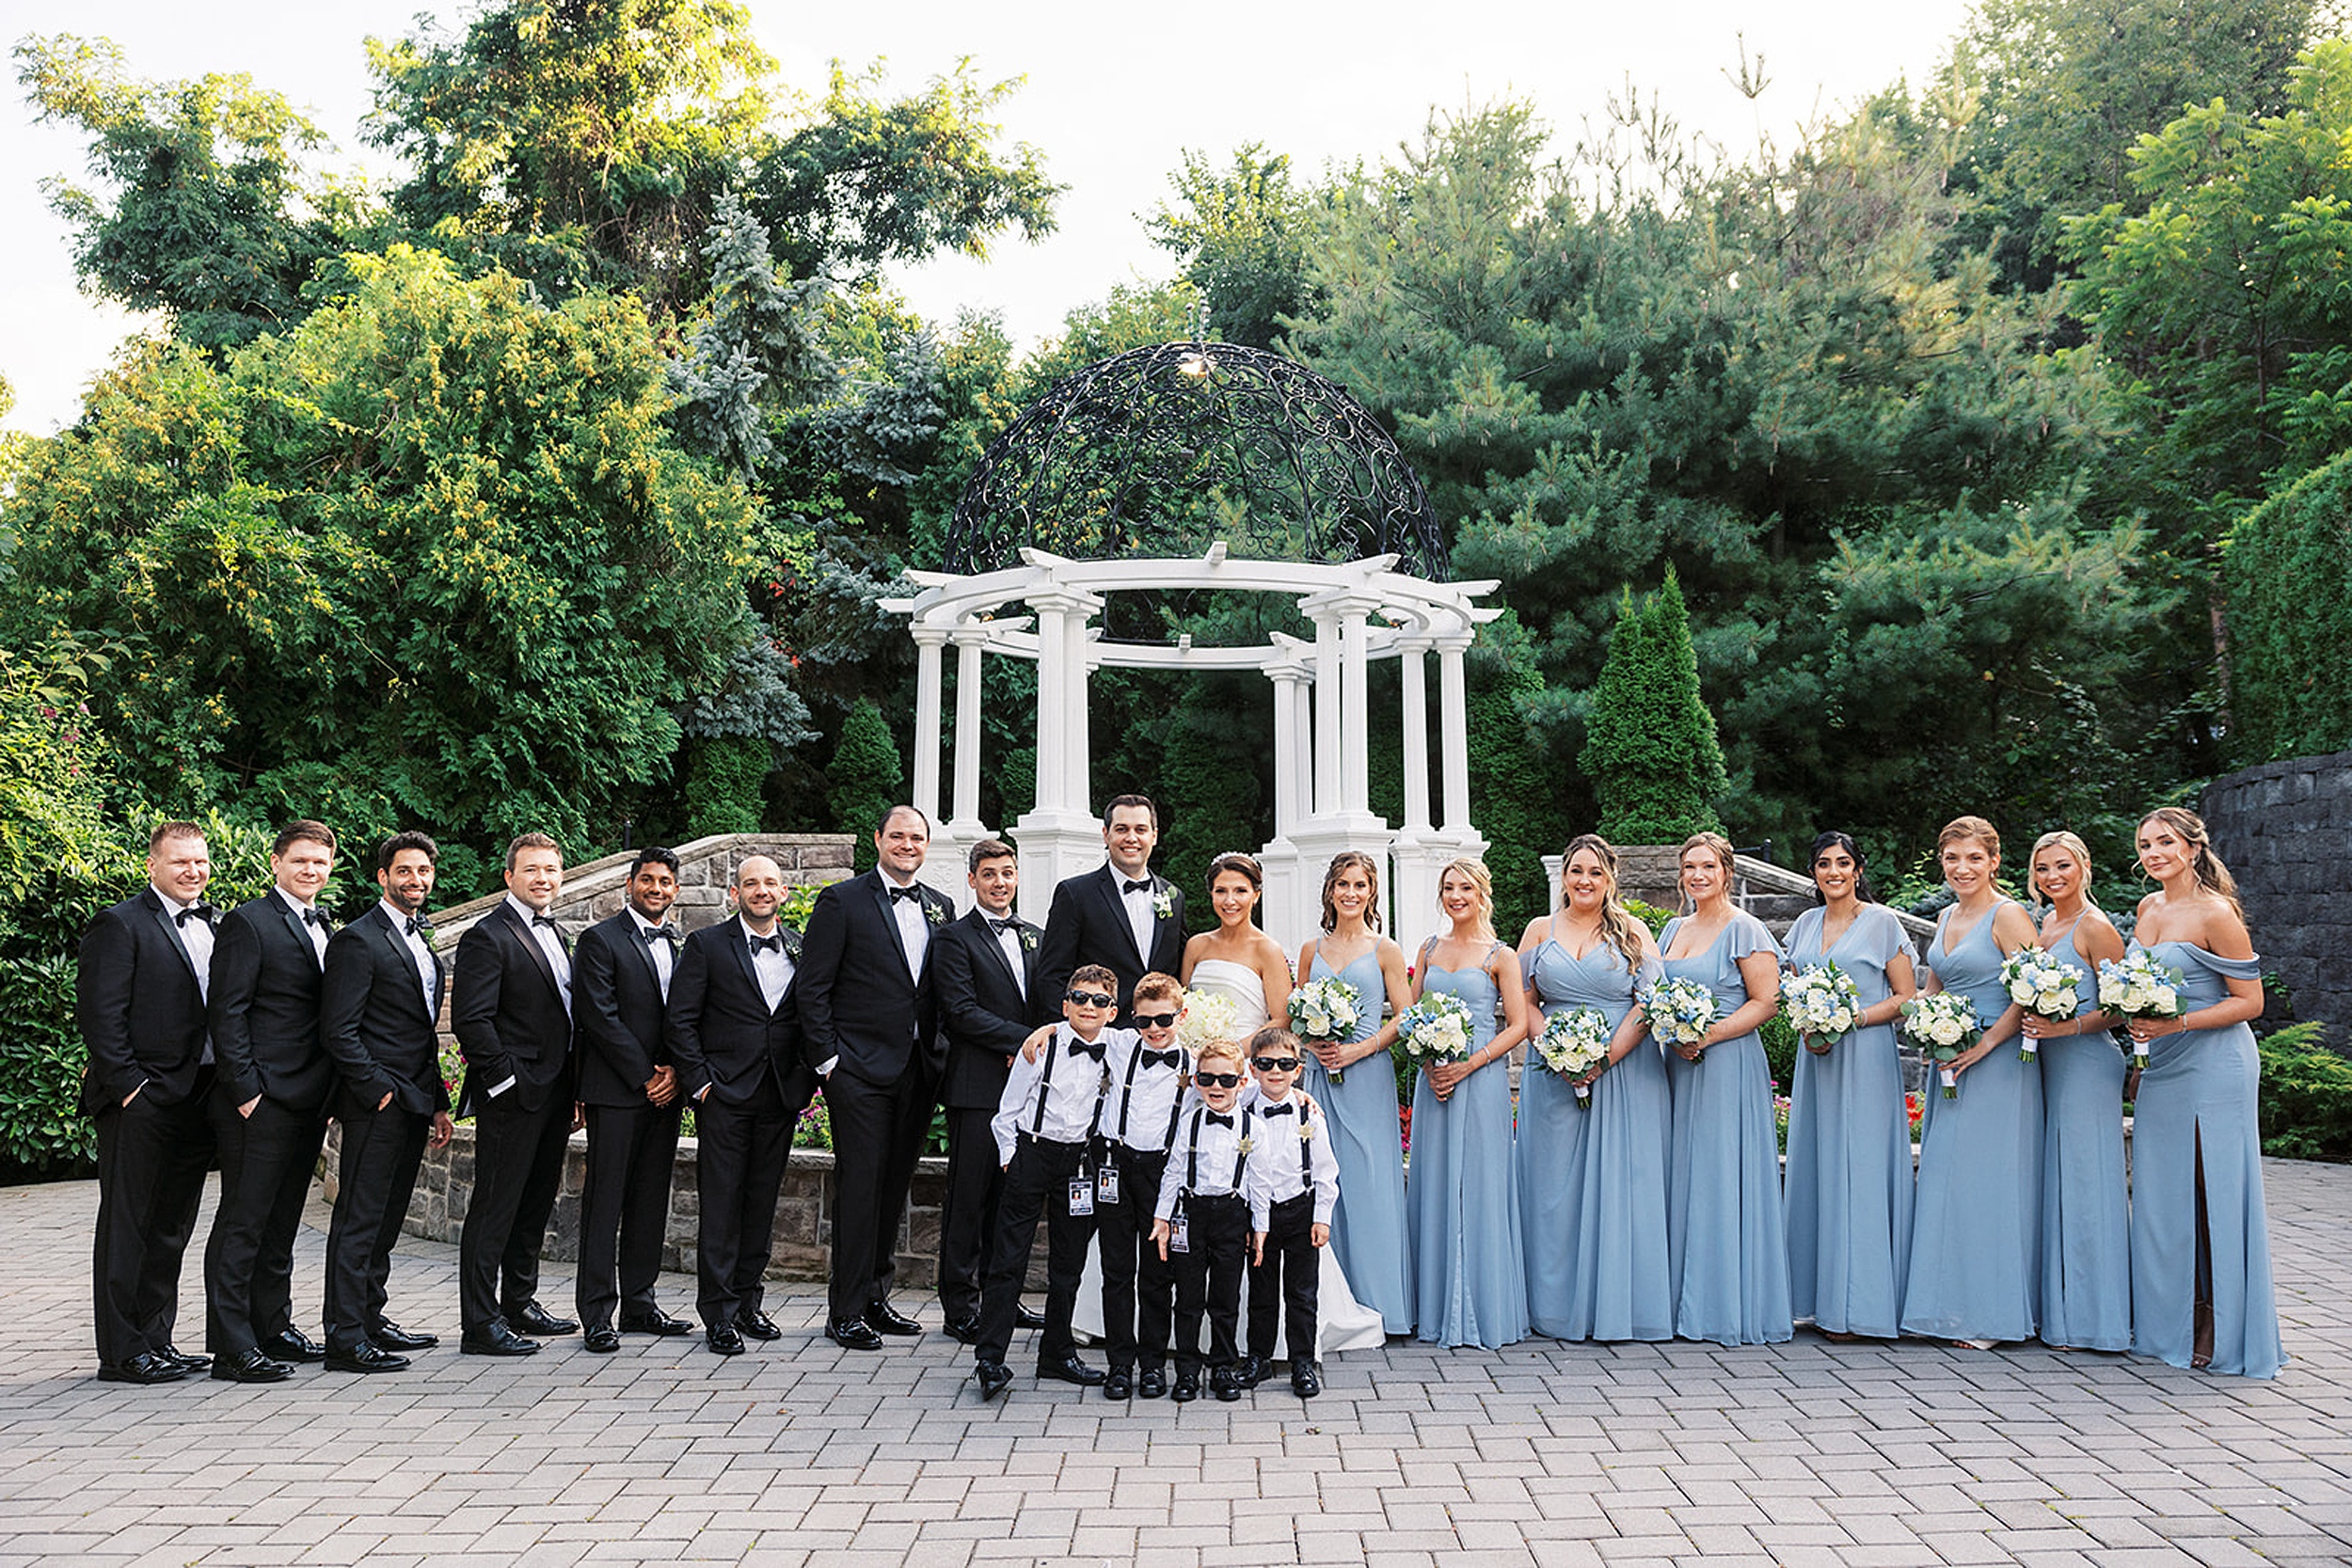 Newlyweds stand together with their bridal party and security kids in a garden by a large white gazebo